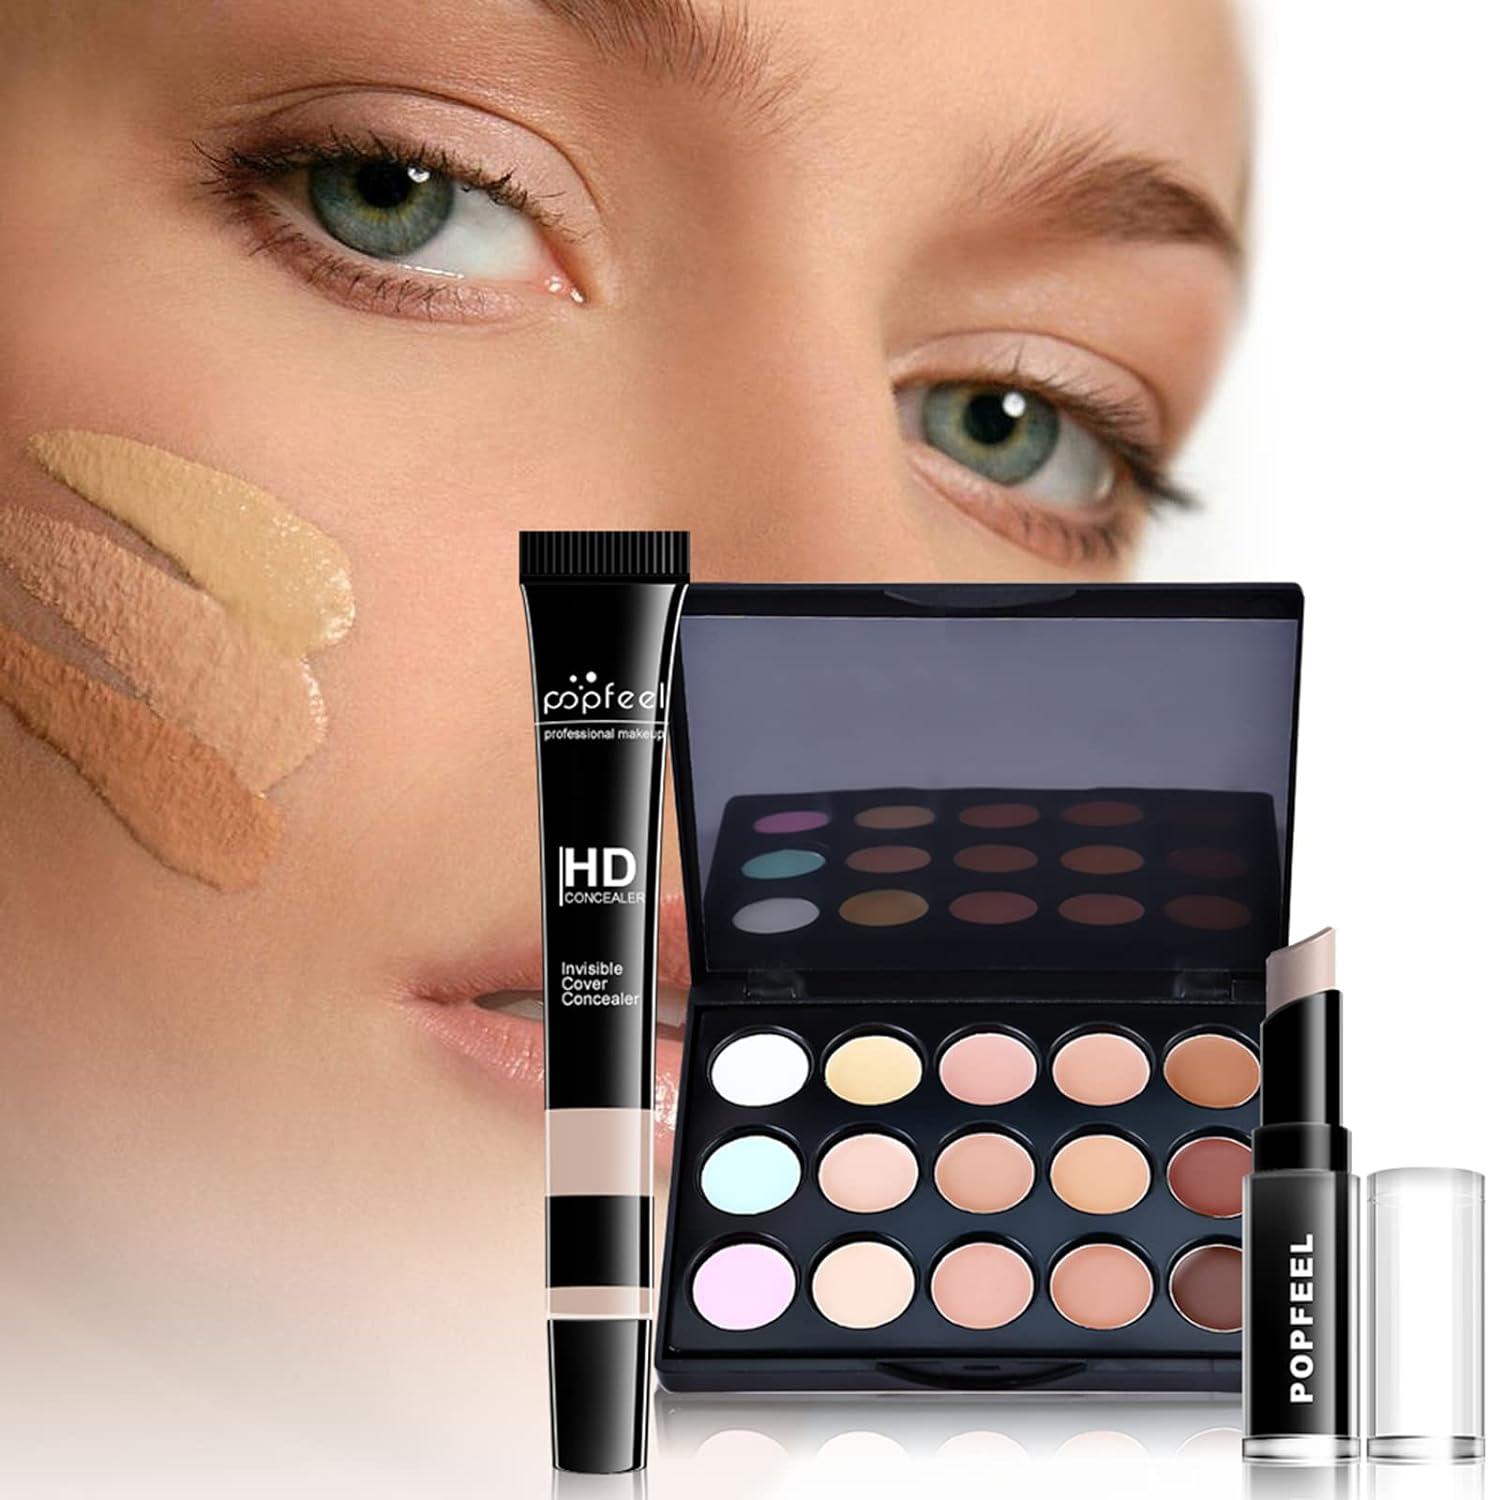  FantasyDay All-in-one Makeup Set Holiday Gift